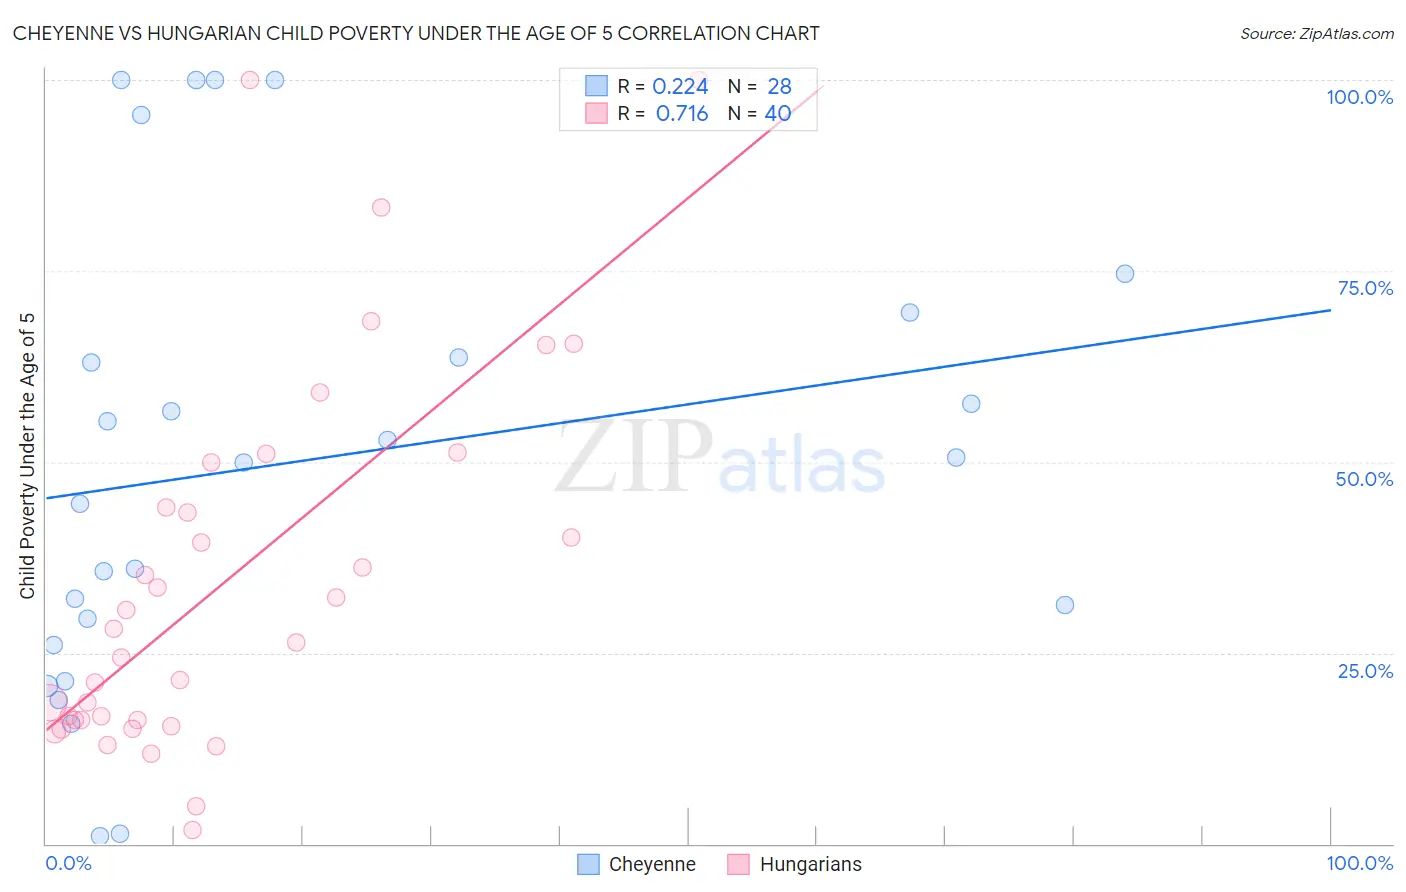 Cheyenne vs Hungarian Child Poverty Under the Age of 5